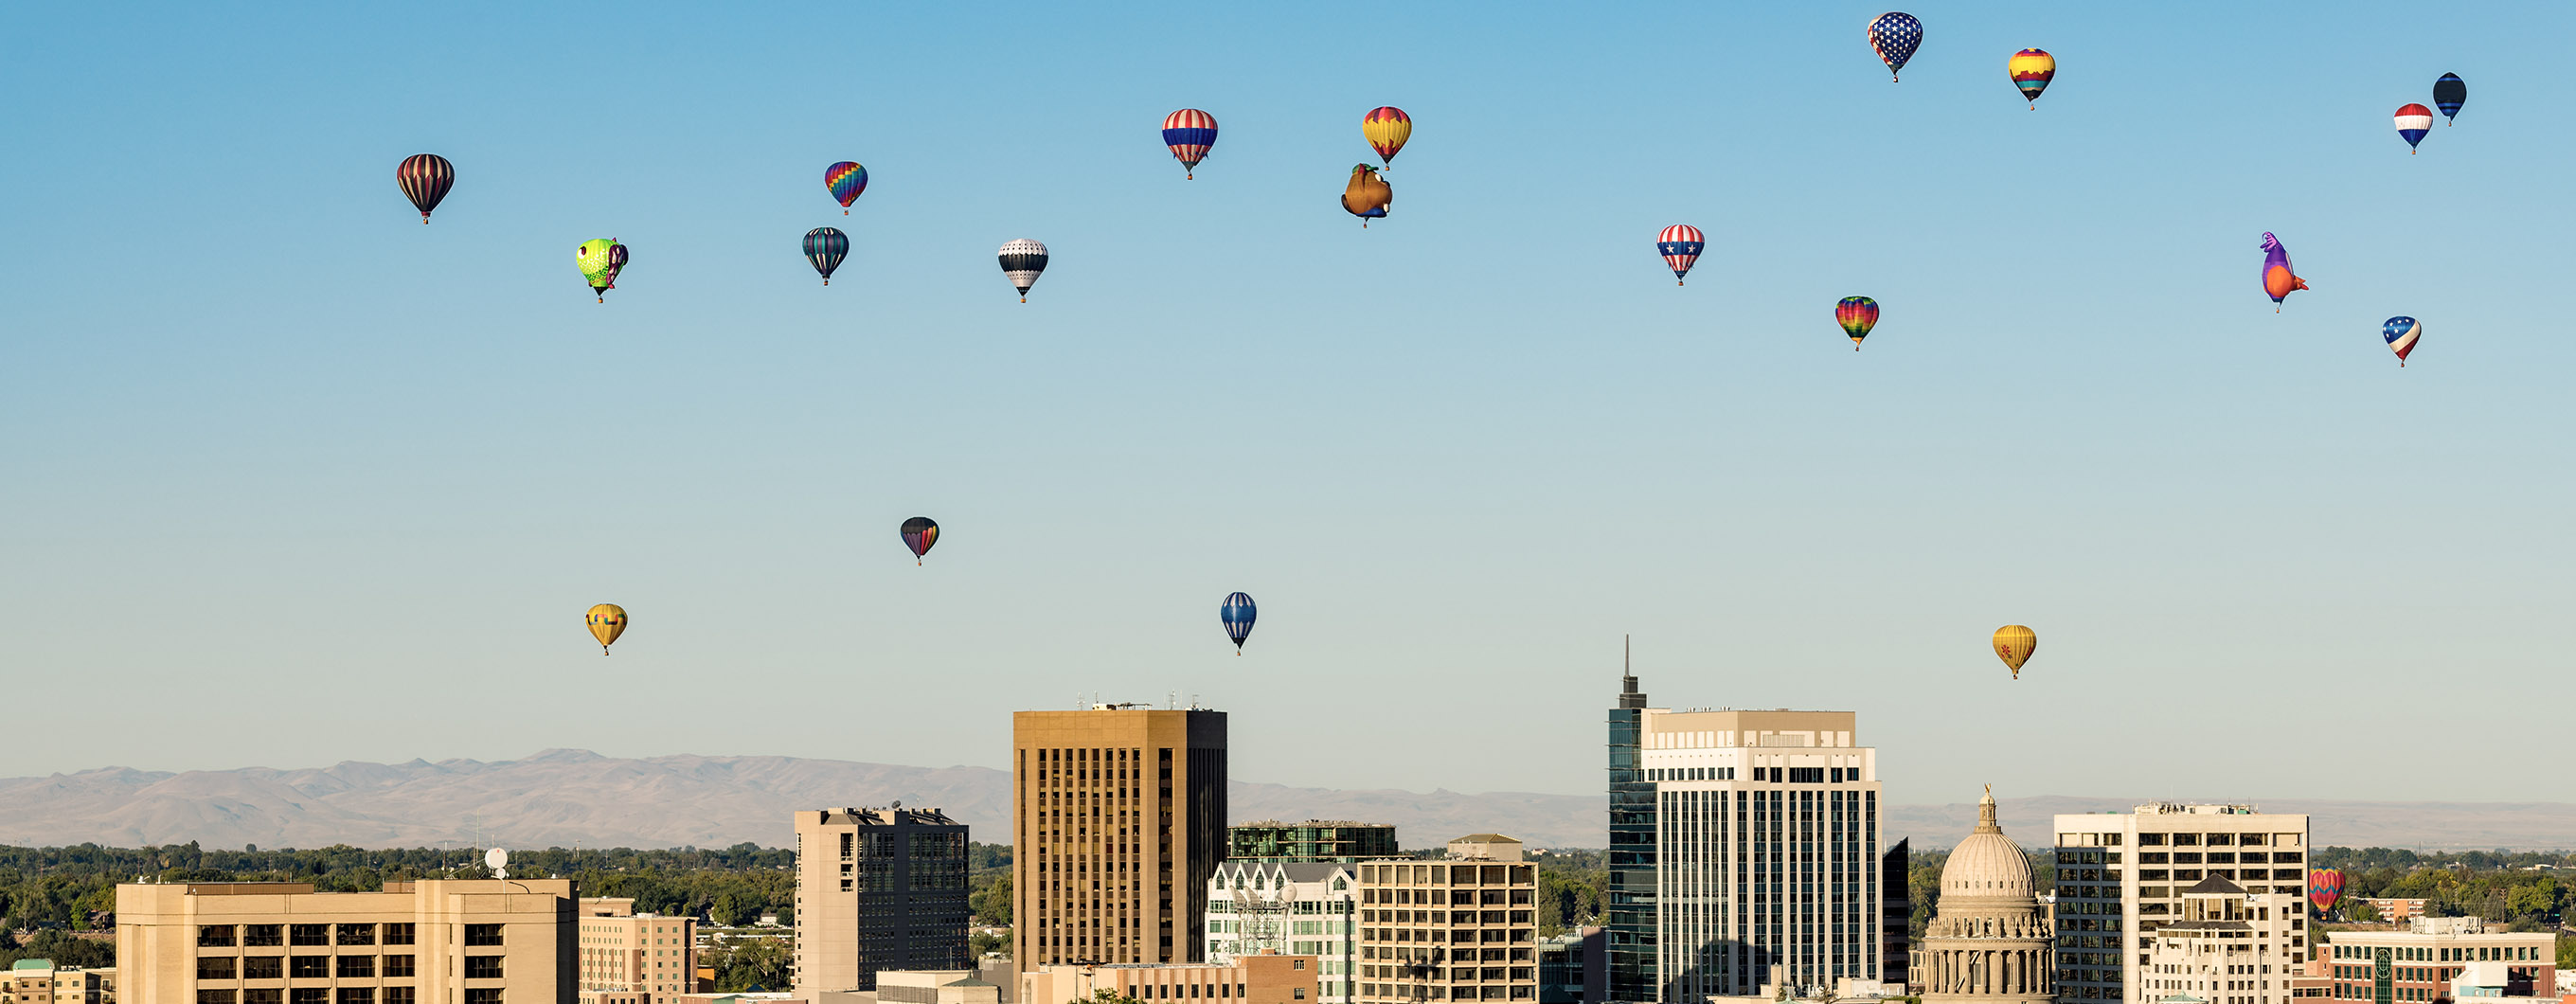 Image of the Boise skyline with hot air balloons in the partially cloudy sky.